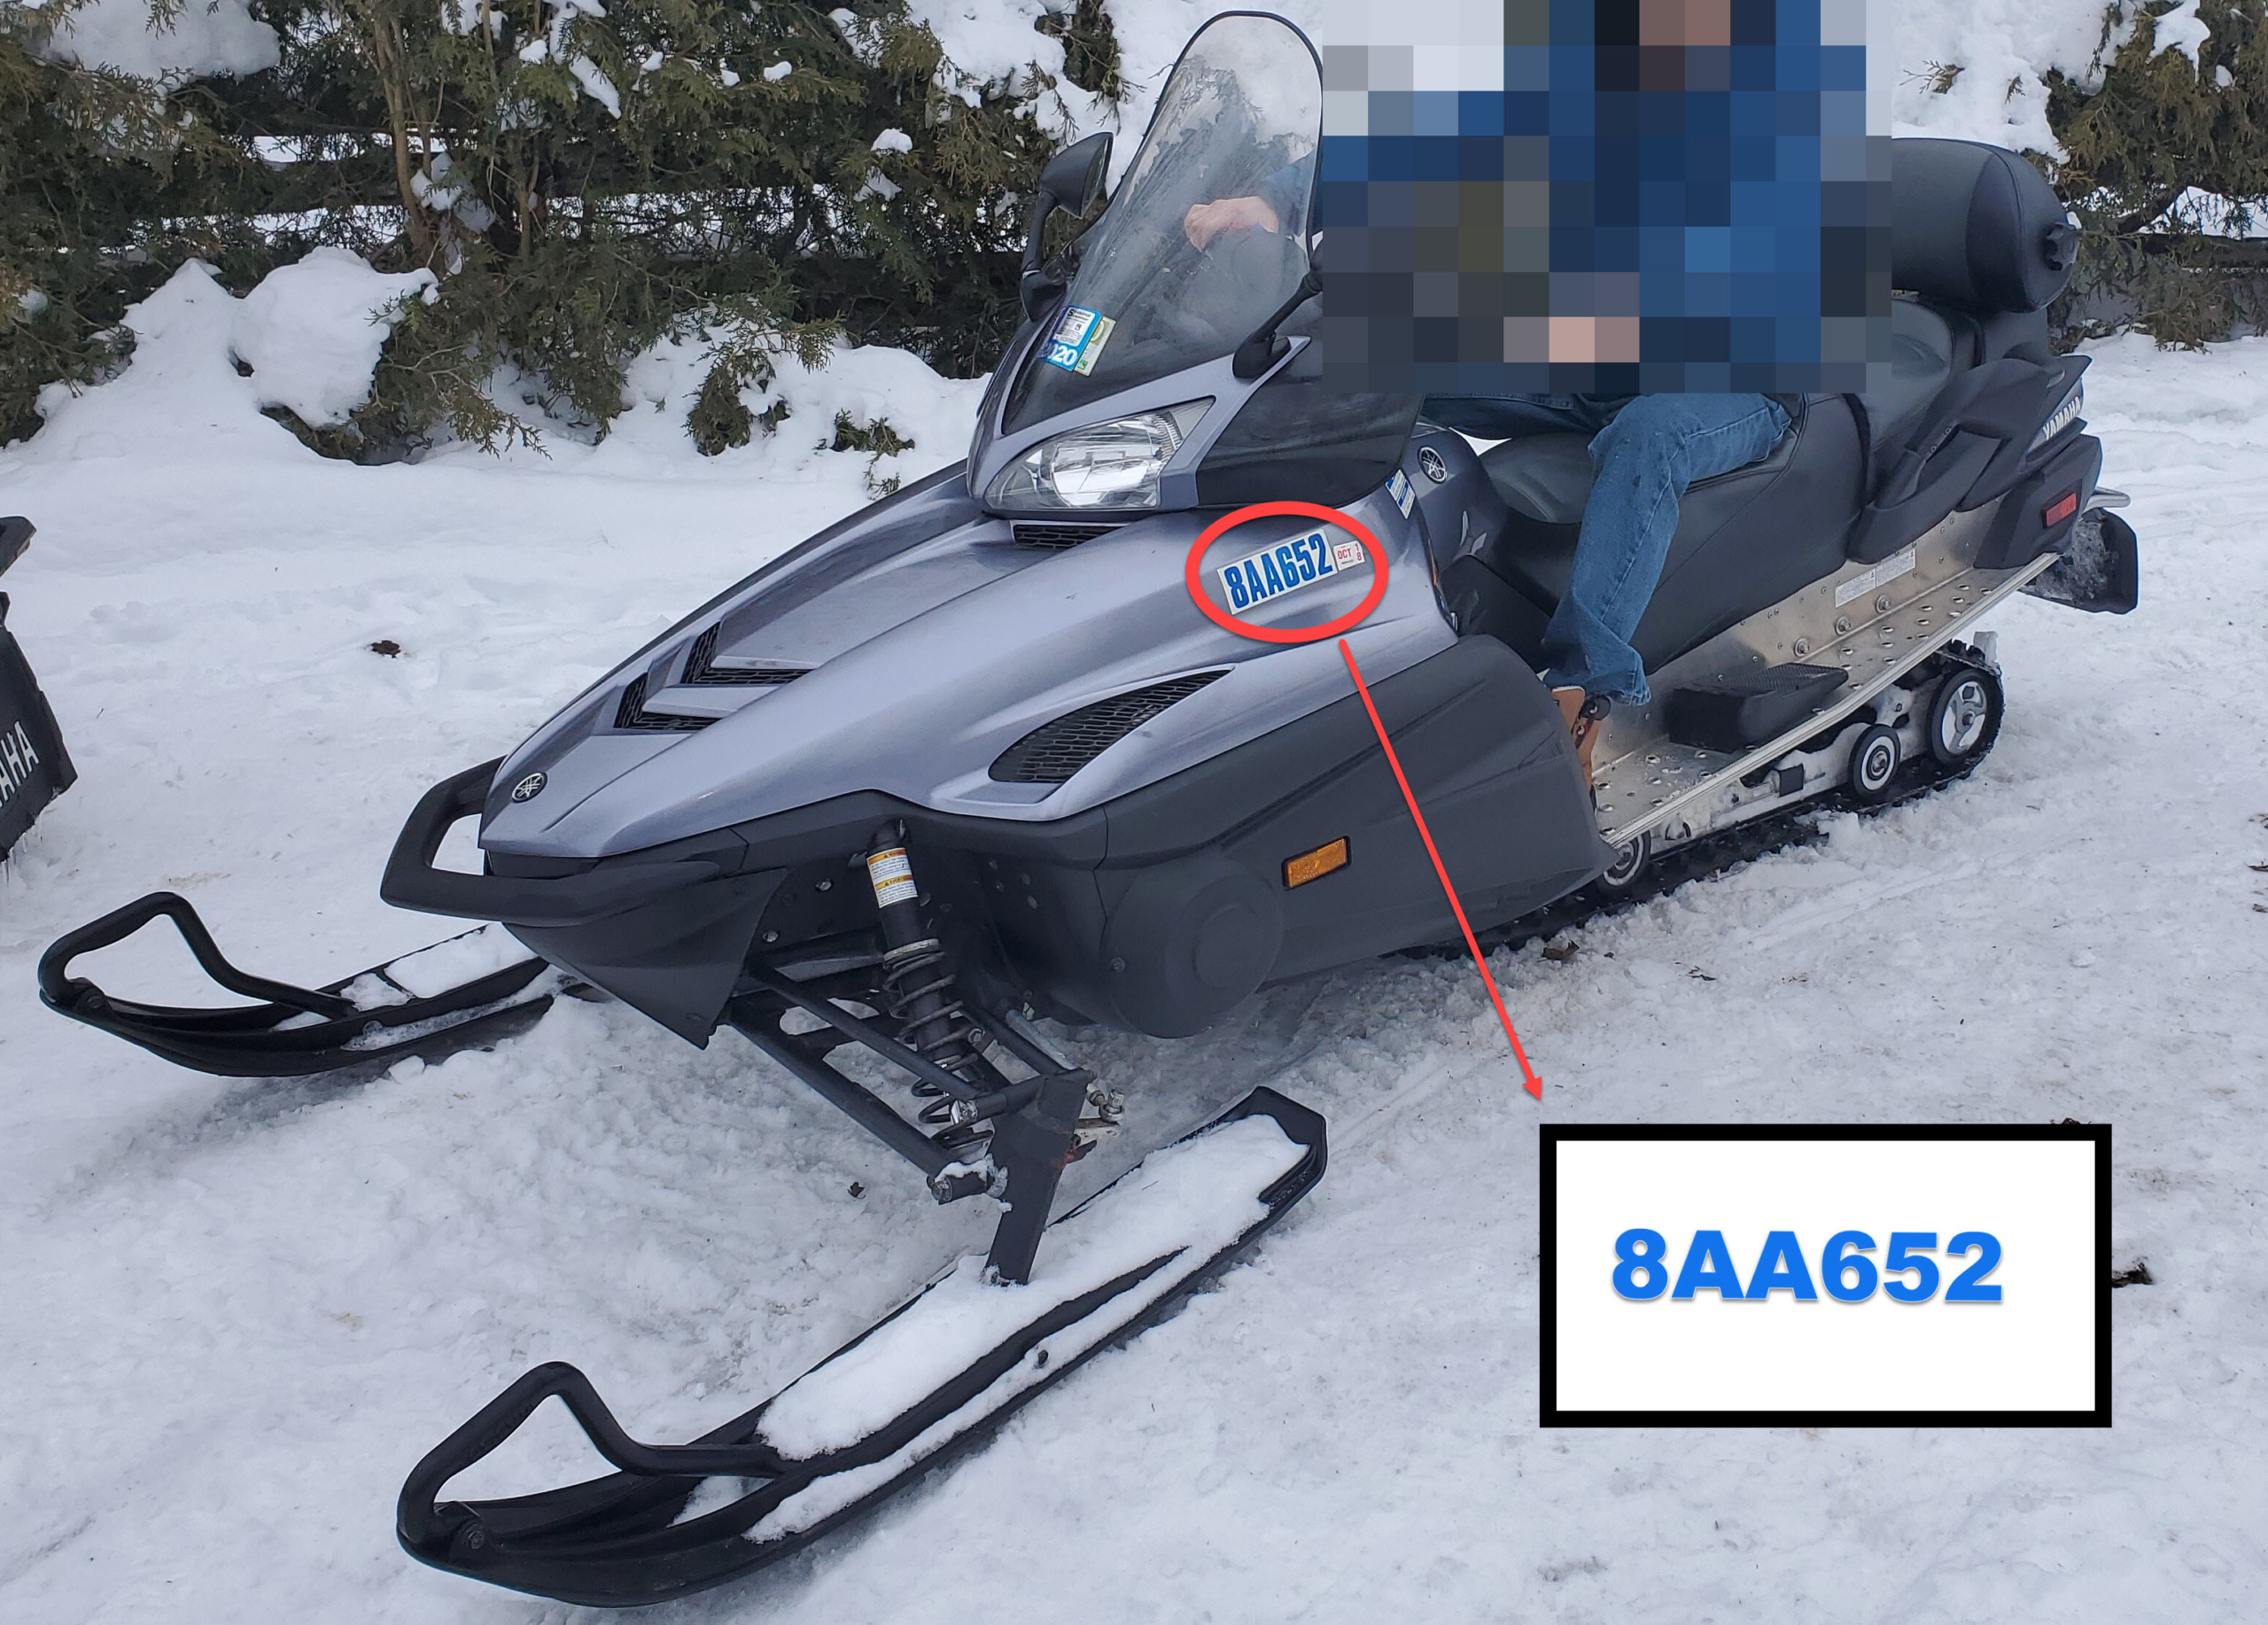 Wellington County OPP search for stolen snowmobile